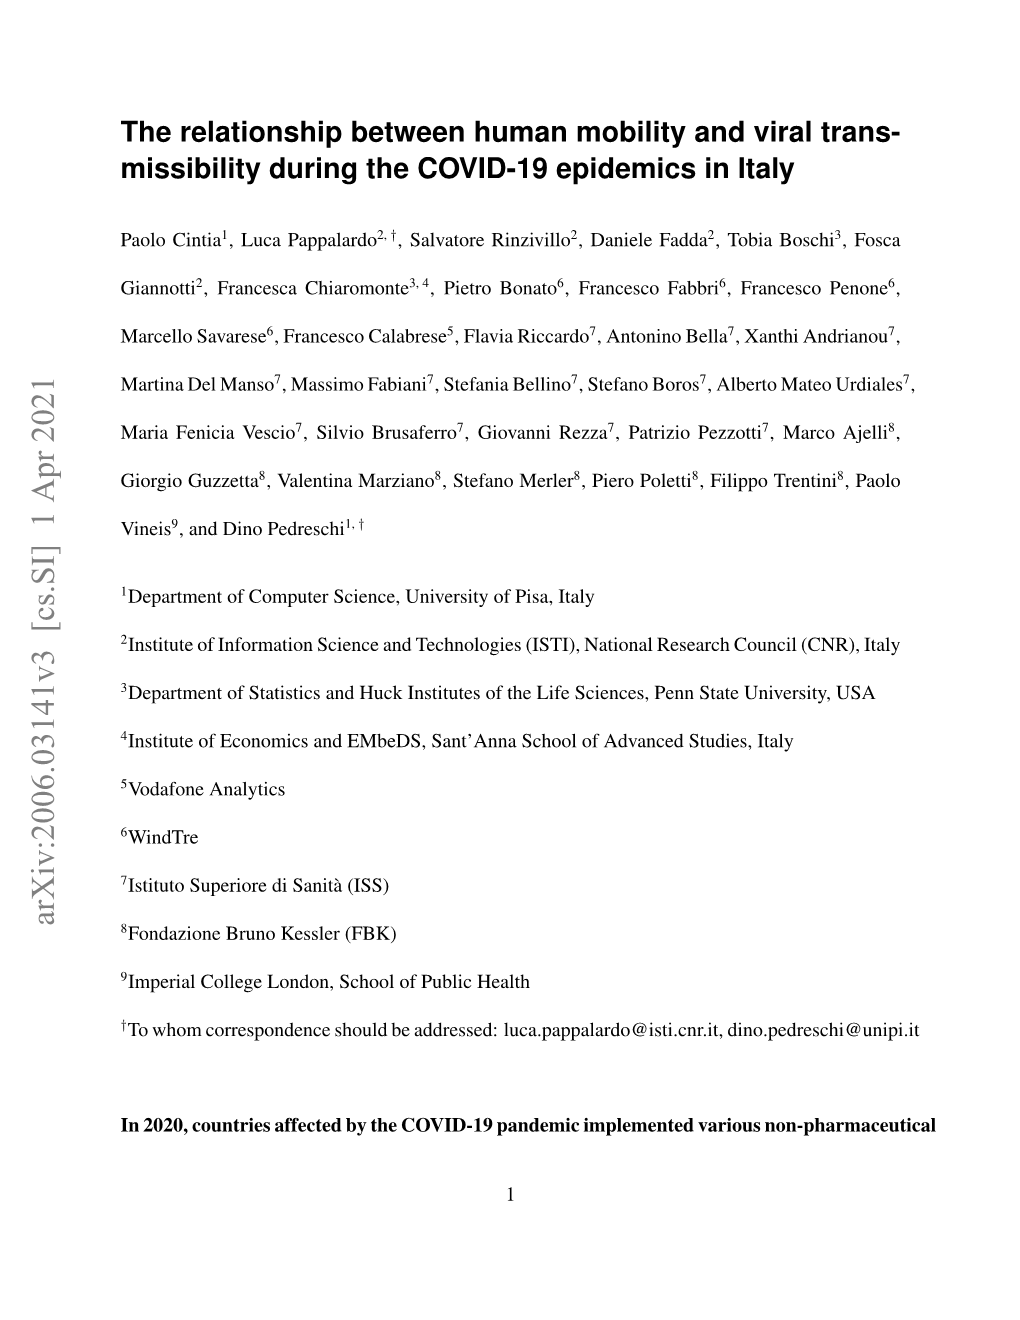 Missibility During the COVID-19 Epidemics in Italy